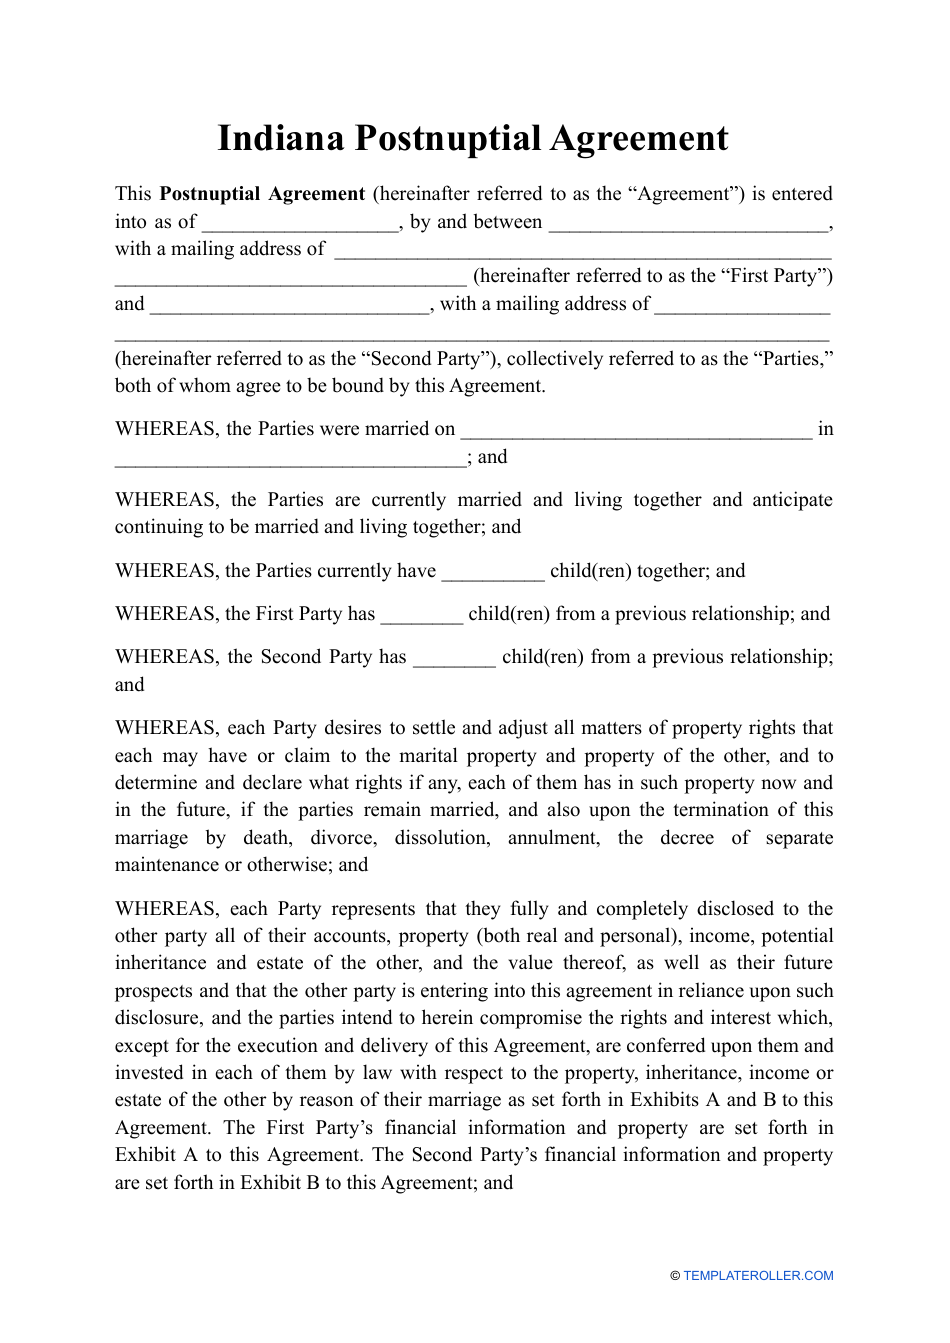 Postnuptial Agreement Template - Indiana, Page 1